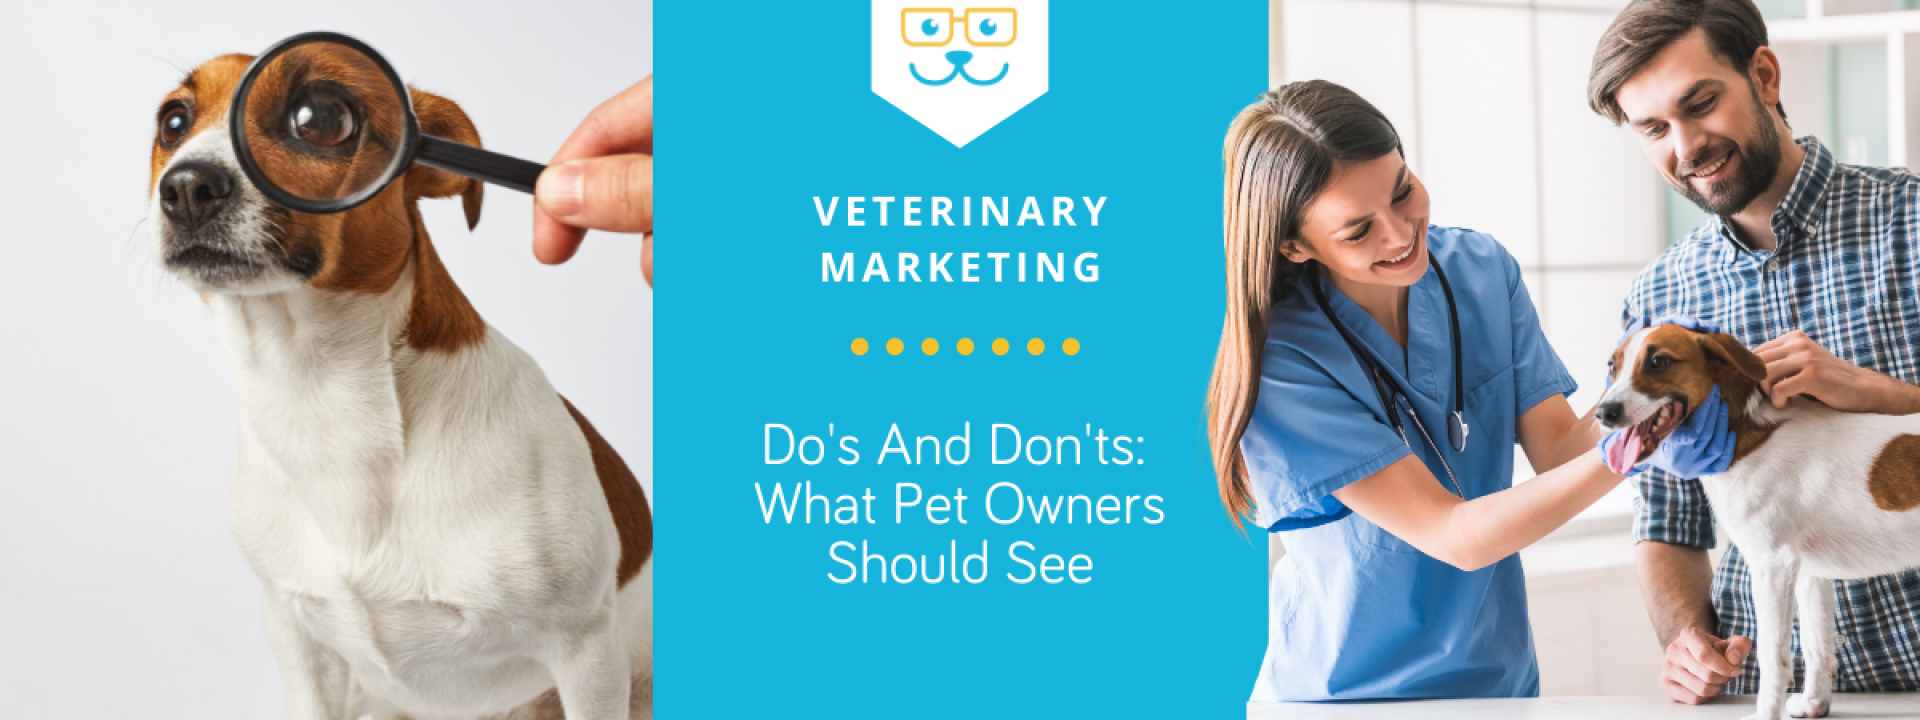 What Pet Owners Should See